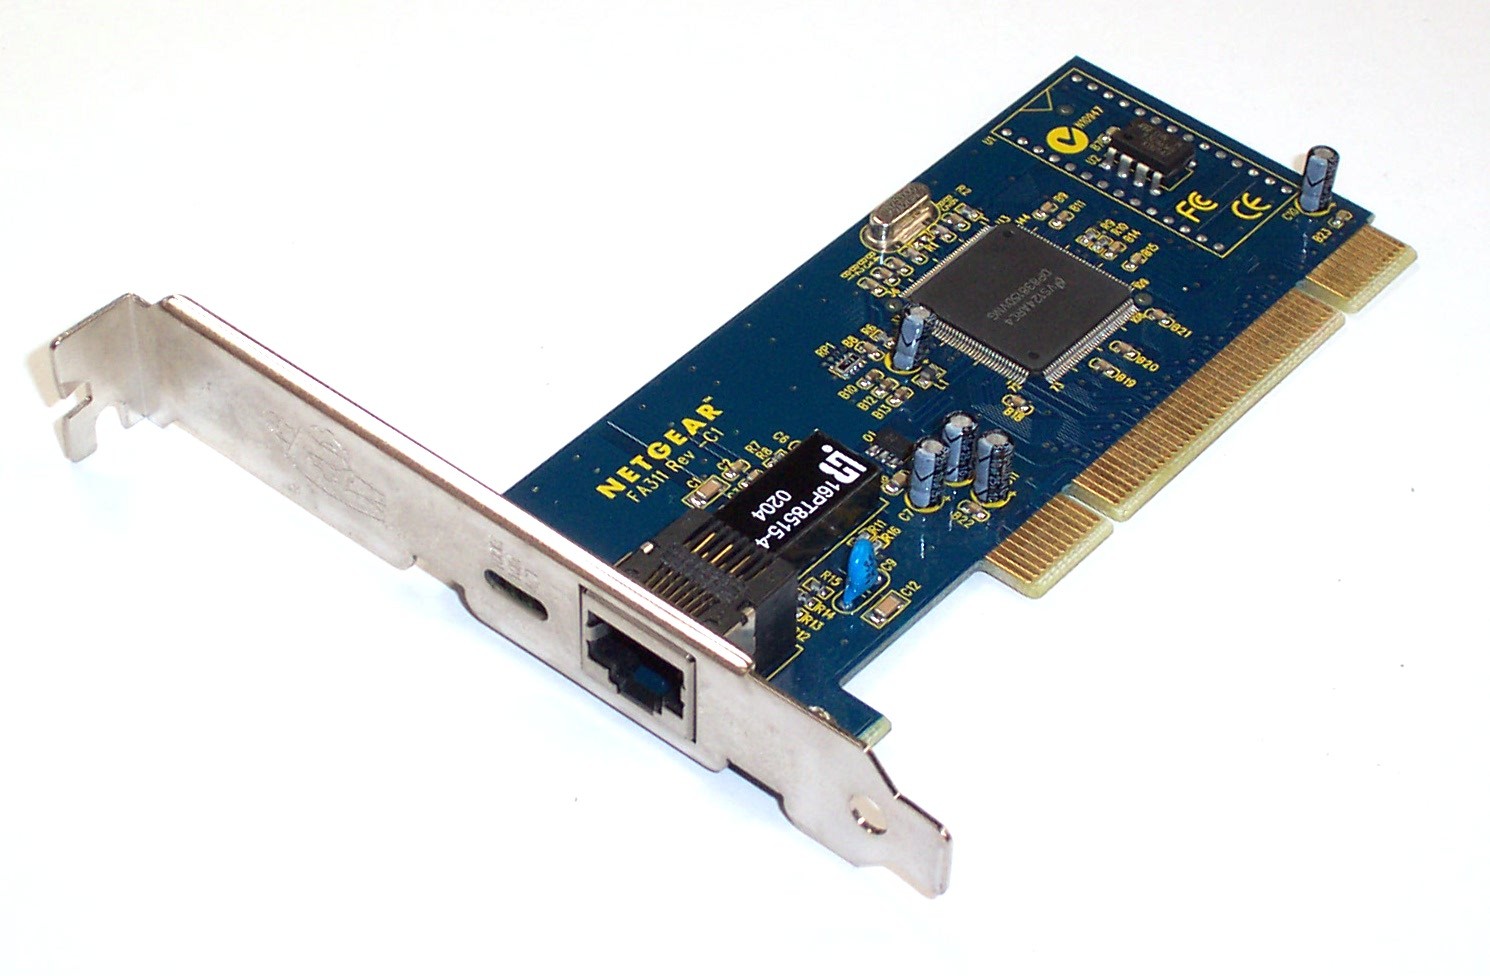 What Is An Ethernet Card Network Adapter?